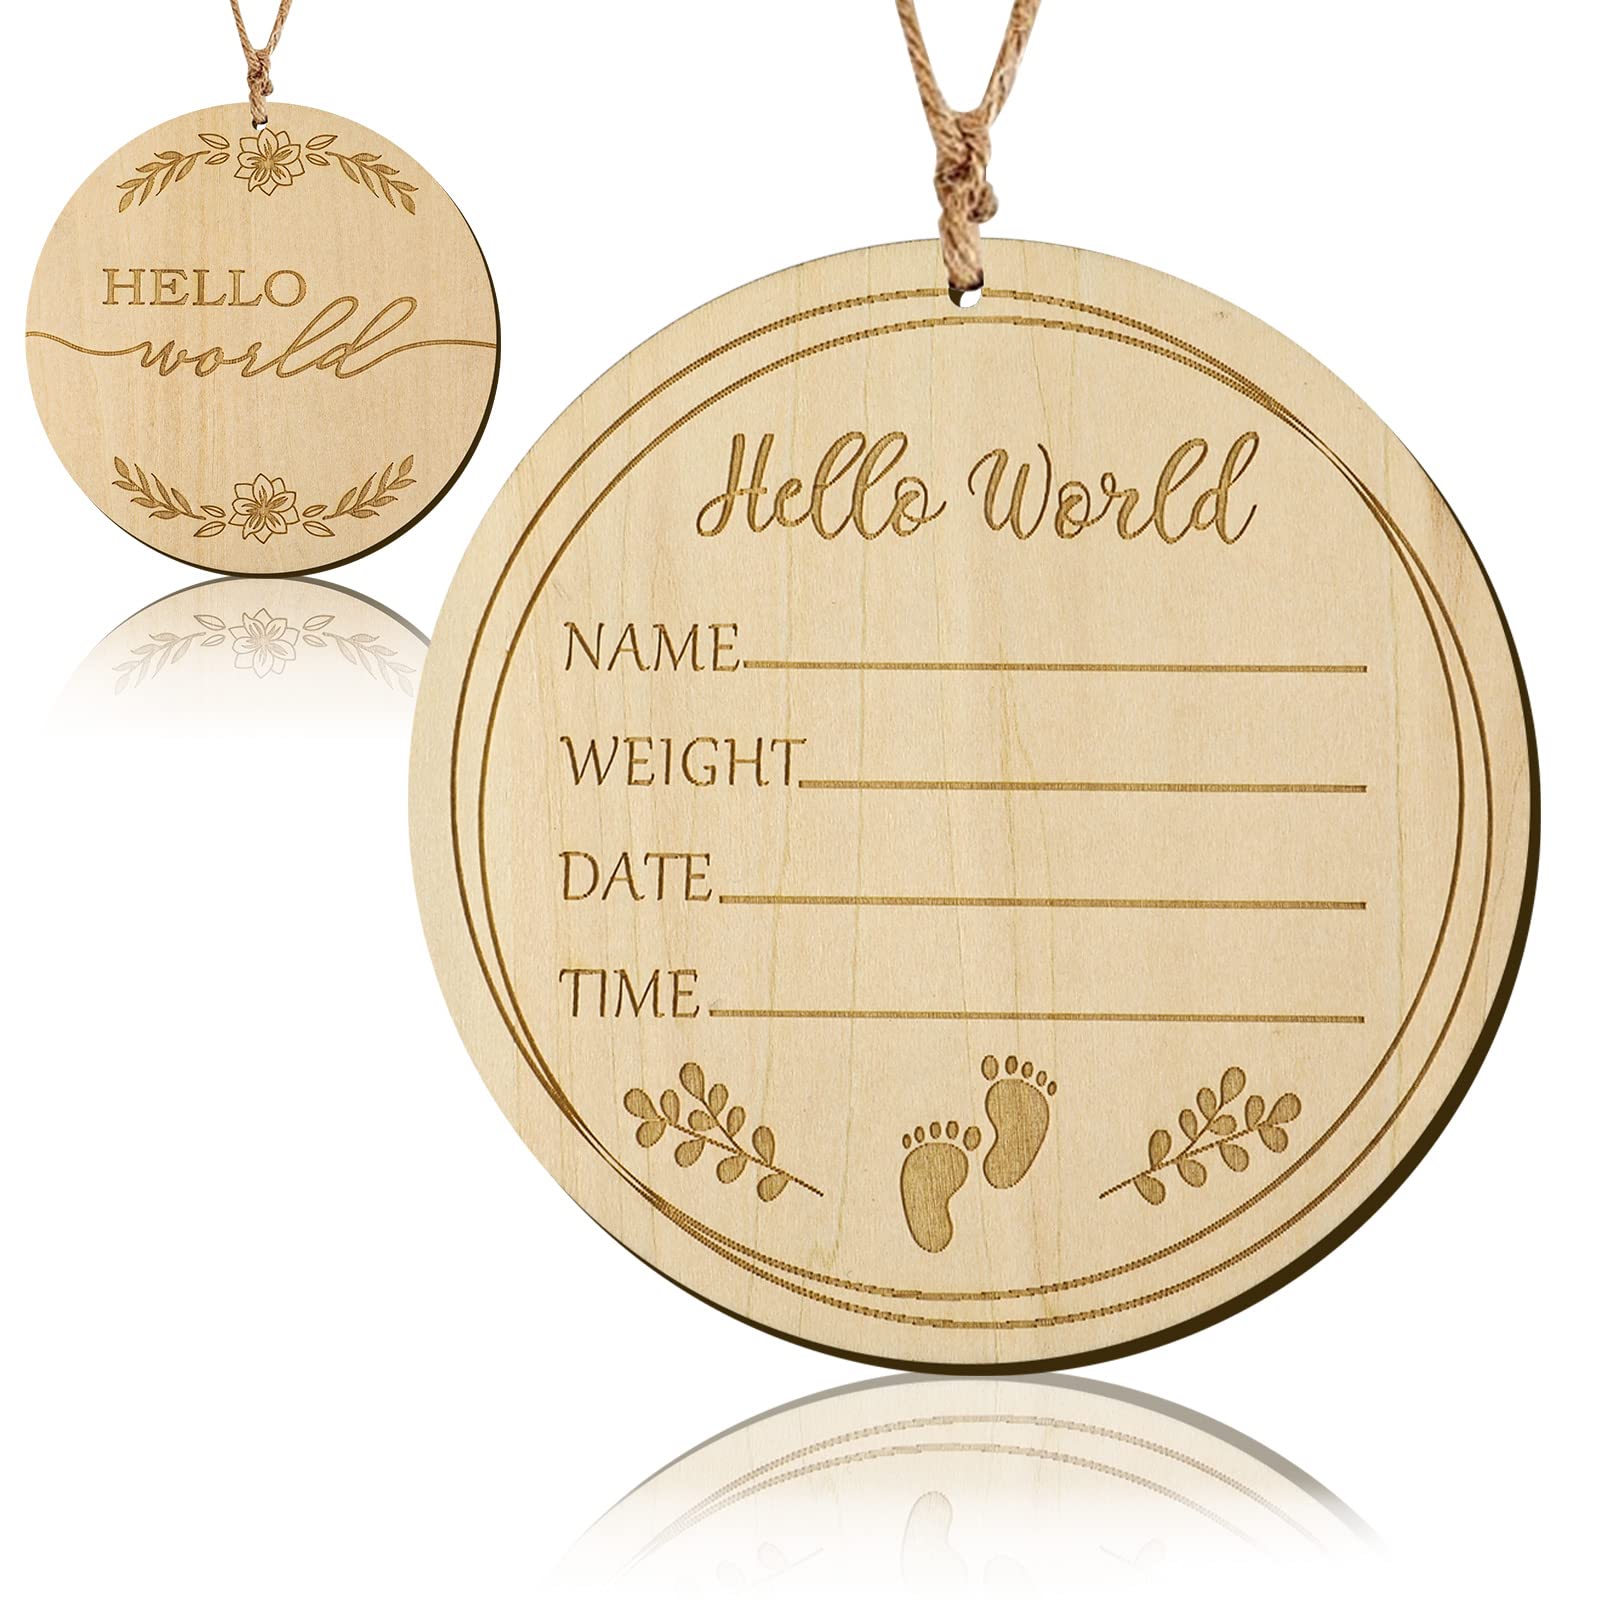 LUTER Baby Announcement Sign, 5.9inch Hello World Newborn Sign with a Hemp Rope Round Wooden Milestone Baby Announcement Sign for Newborn Photo Props